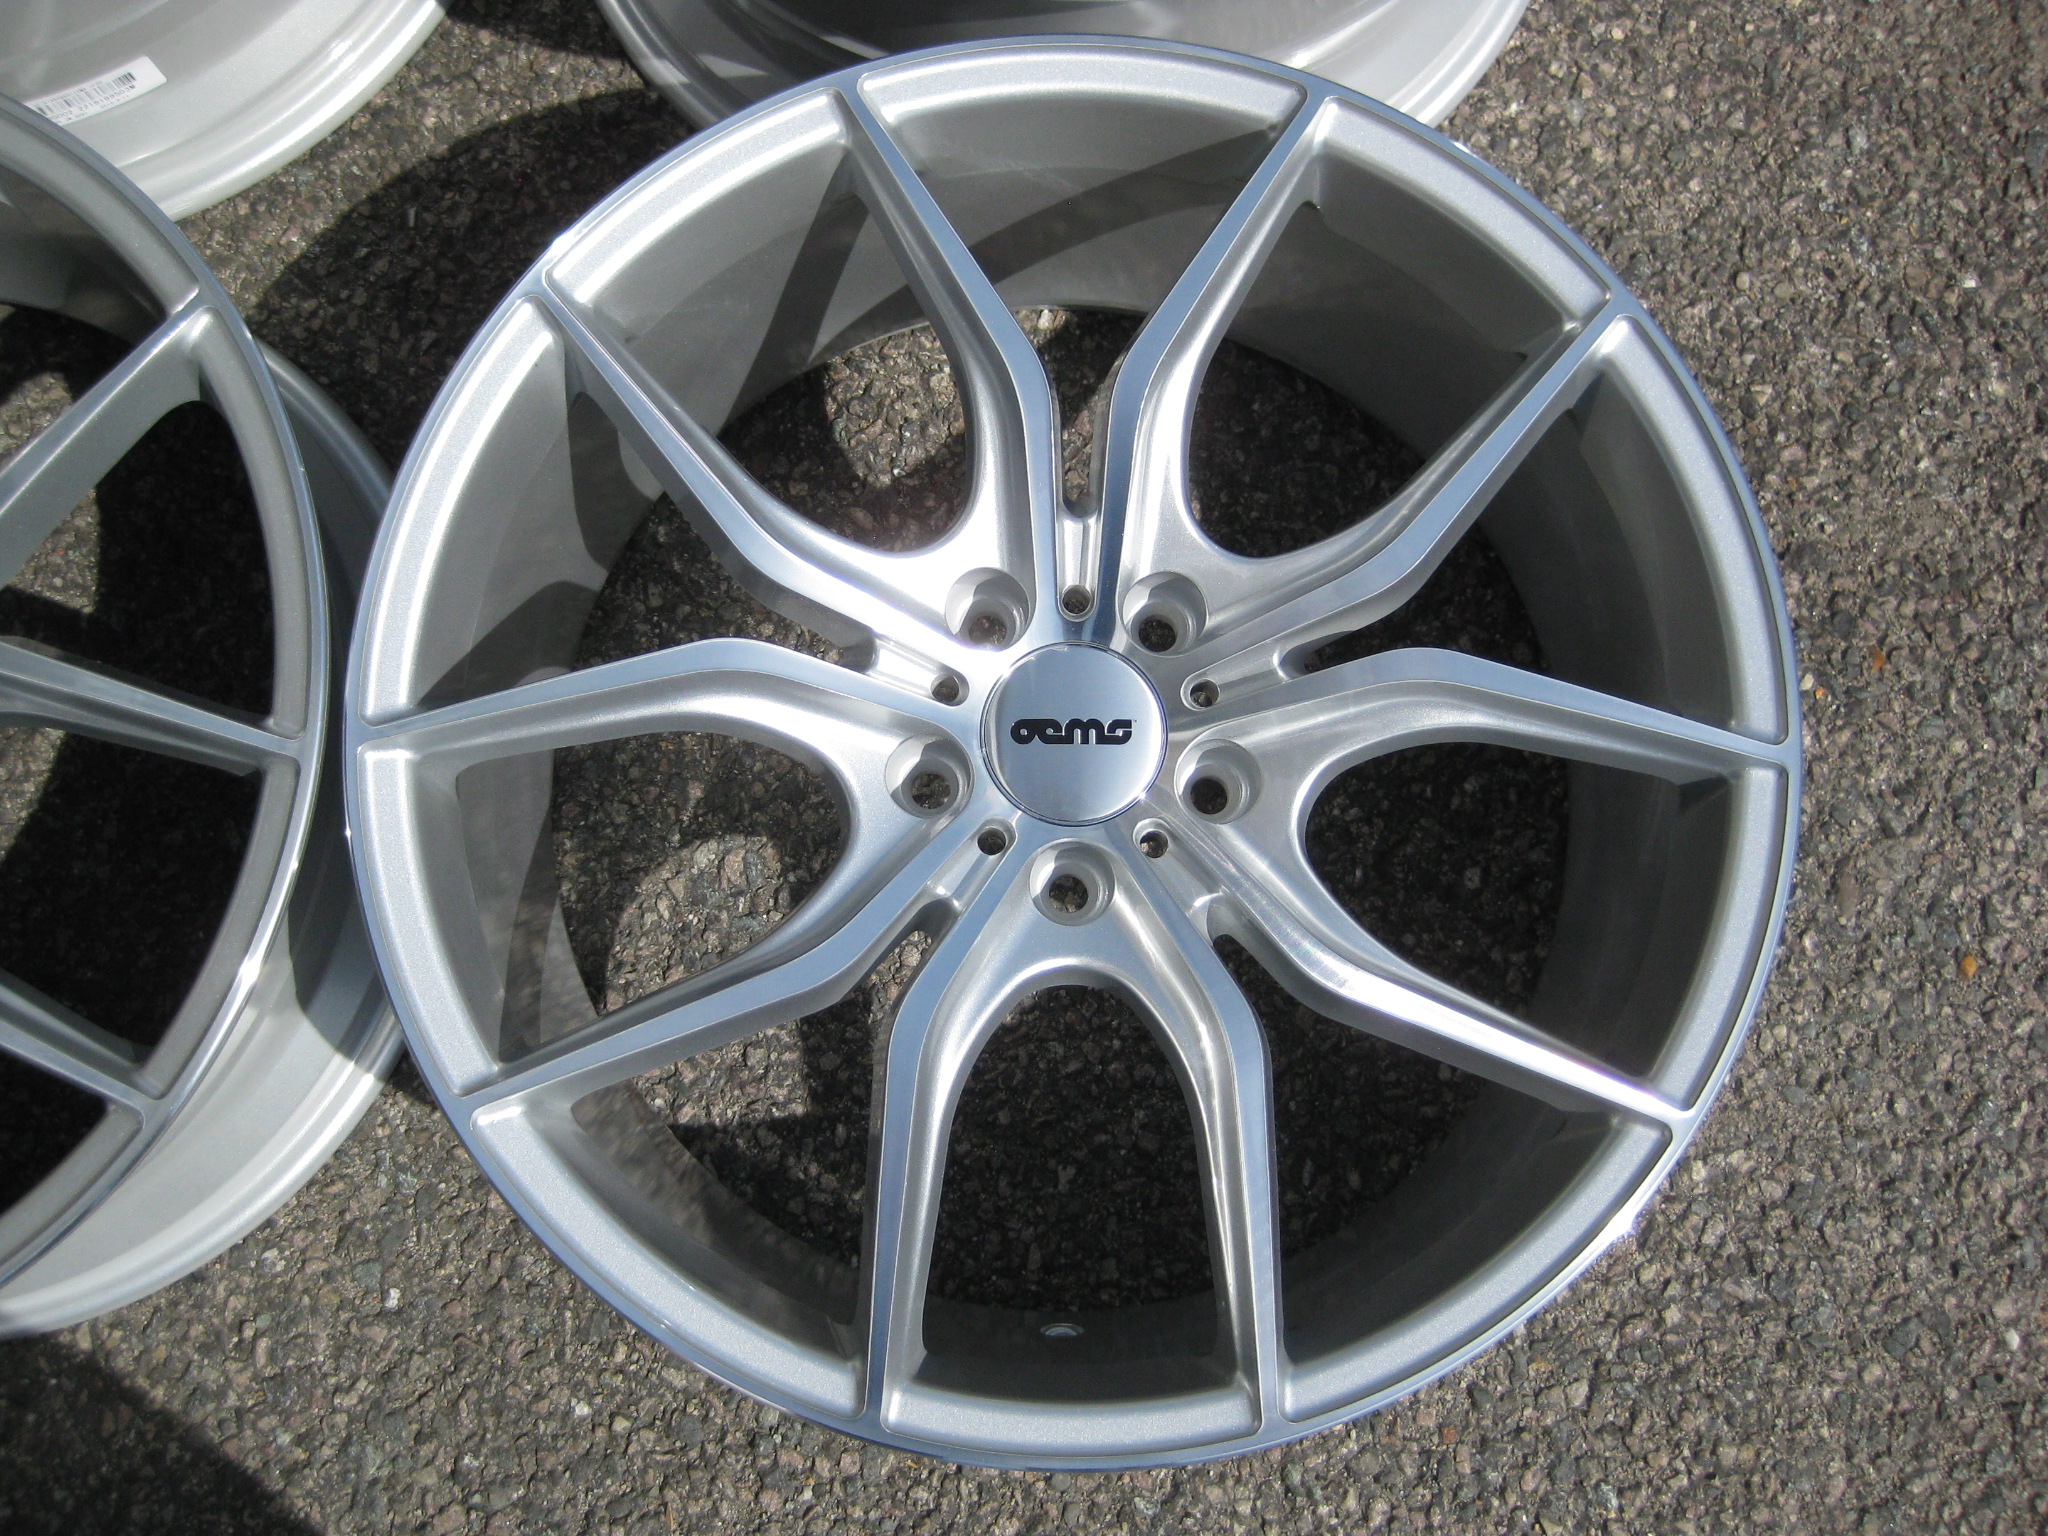 NEW 19" OEMS FS17 CONCAVED ALLOY WHEELS IN SILVER WITH POLISHED FACE, WIDER 9.5" REAR